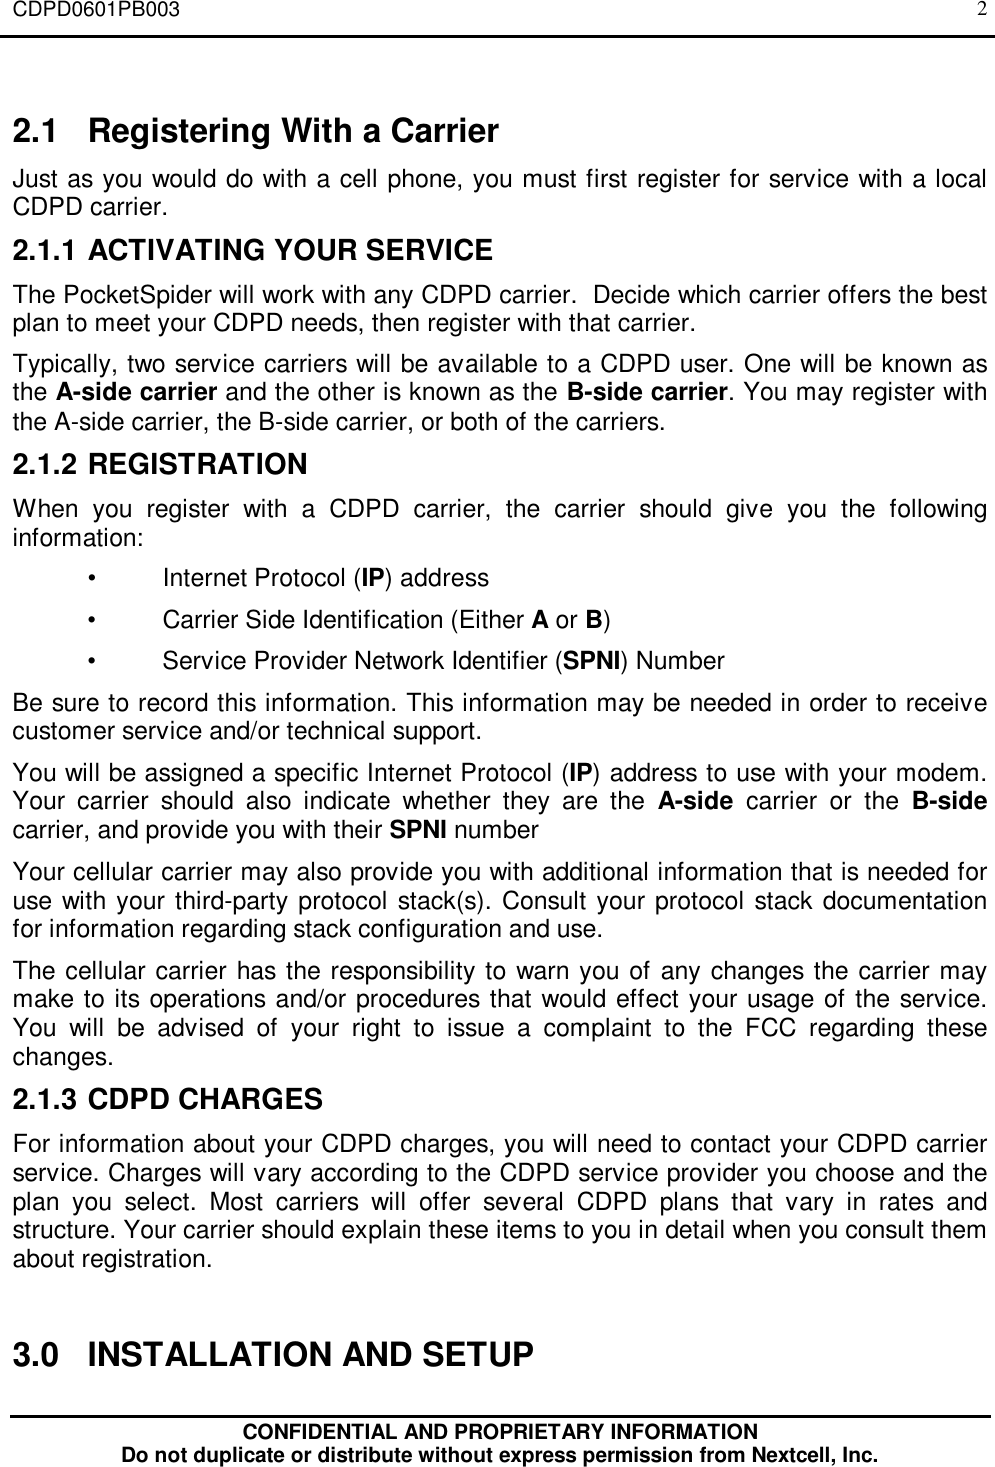 CDPD0601PB003CONFIDENTIAL AND PROPRIETARY INFORMATIONDo not duplicate or distribute without express permission from Nextcell, Inc.22.1 Registering With a CarrierJust as you would do with a cell phone, you must first register for service with a localCDPD carrier.2.1.1 ACTIVATING YOUR SERVICEThe PocketSpider will work with any CDPD carrier.  Decide which carrier offers the bestplan to meet your CDPD needs, then register with that carrier.Typically, two service carriers will be available to a CDPD user. One will be known asthe A-side carrier and the other is known as the B-side carrier. You may register withthe A-side carrier, the B-side carrier, or both of the carriers.2.1.2 REGISTRATIONWhen you register with a CDPD carrier, the carrier should give you the followinginformation:•Internet Protocol (IP) address•Carrier Side Identification (Either A or B)•Service Provider Network Identifier (SPNI) NumberBe sure to record this information. This information may be needed in order to receivecustomer service and/or technical support.You will be assigned a specific Internet Protocol (IP) address to use with your modem.Your carrier should also indicate whether they are the A-side carrier or the B-sidecarrier, and provide you with their SPNI numberYour cellular carrier may also provide you with additional information that is needed foruse with your third-party protocol stack(s). Consult your protocol stack documentationfor information regarding stack configuration and use.The cellular carrier has the responsibility to warn you of any changes the carrier maymake to its operations and/or procedures that would effect your usage of the service.You will be advised of your right to issue a complaint to the FCC regarding thesechanges.2.1.3 CDPD CHARGESFor information about your CDPD charges, you will need to contact your CDPD carrierservice. Charges will vary according to the CDPD service provider you choose and theplan you select. Most carriers will offer several CDPD plans that vary in rates andstructure. Your carrier should explain these items to you in detail when you consult themabout registration.3.0 INSTALLATION AND SETUP